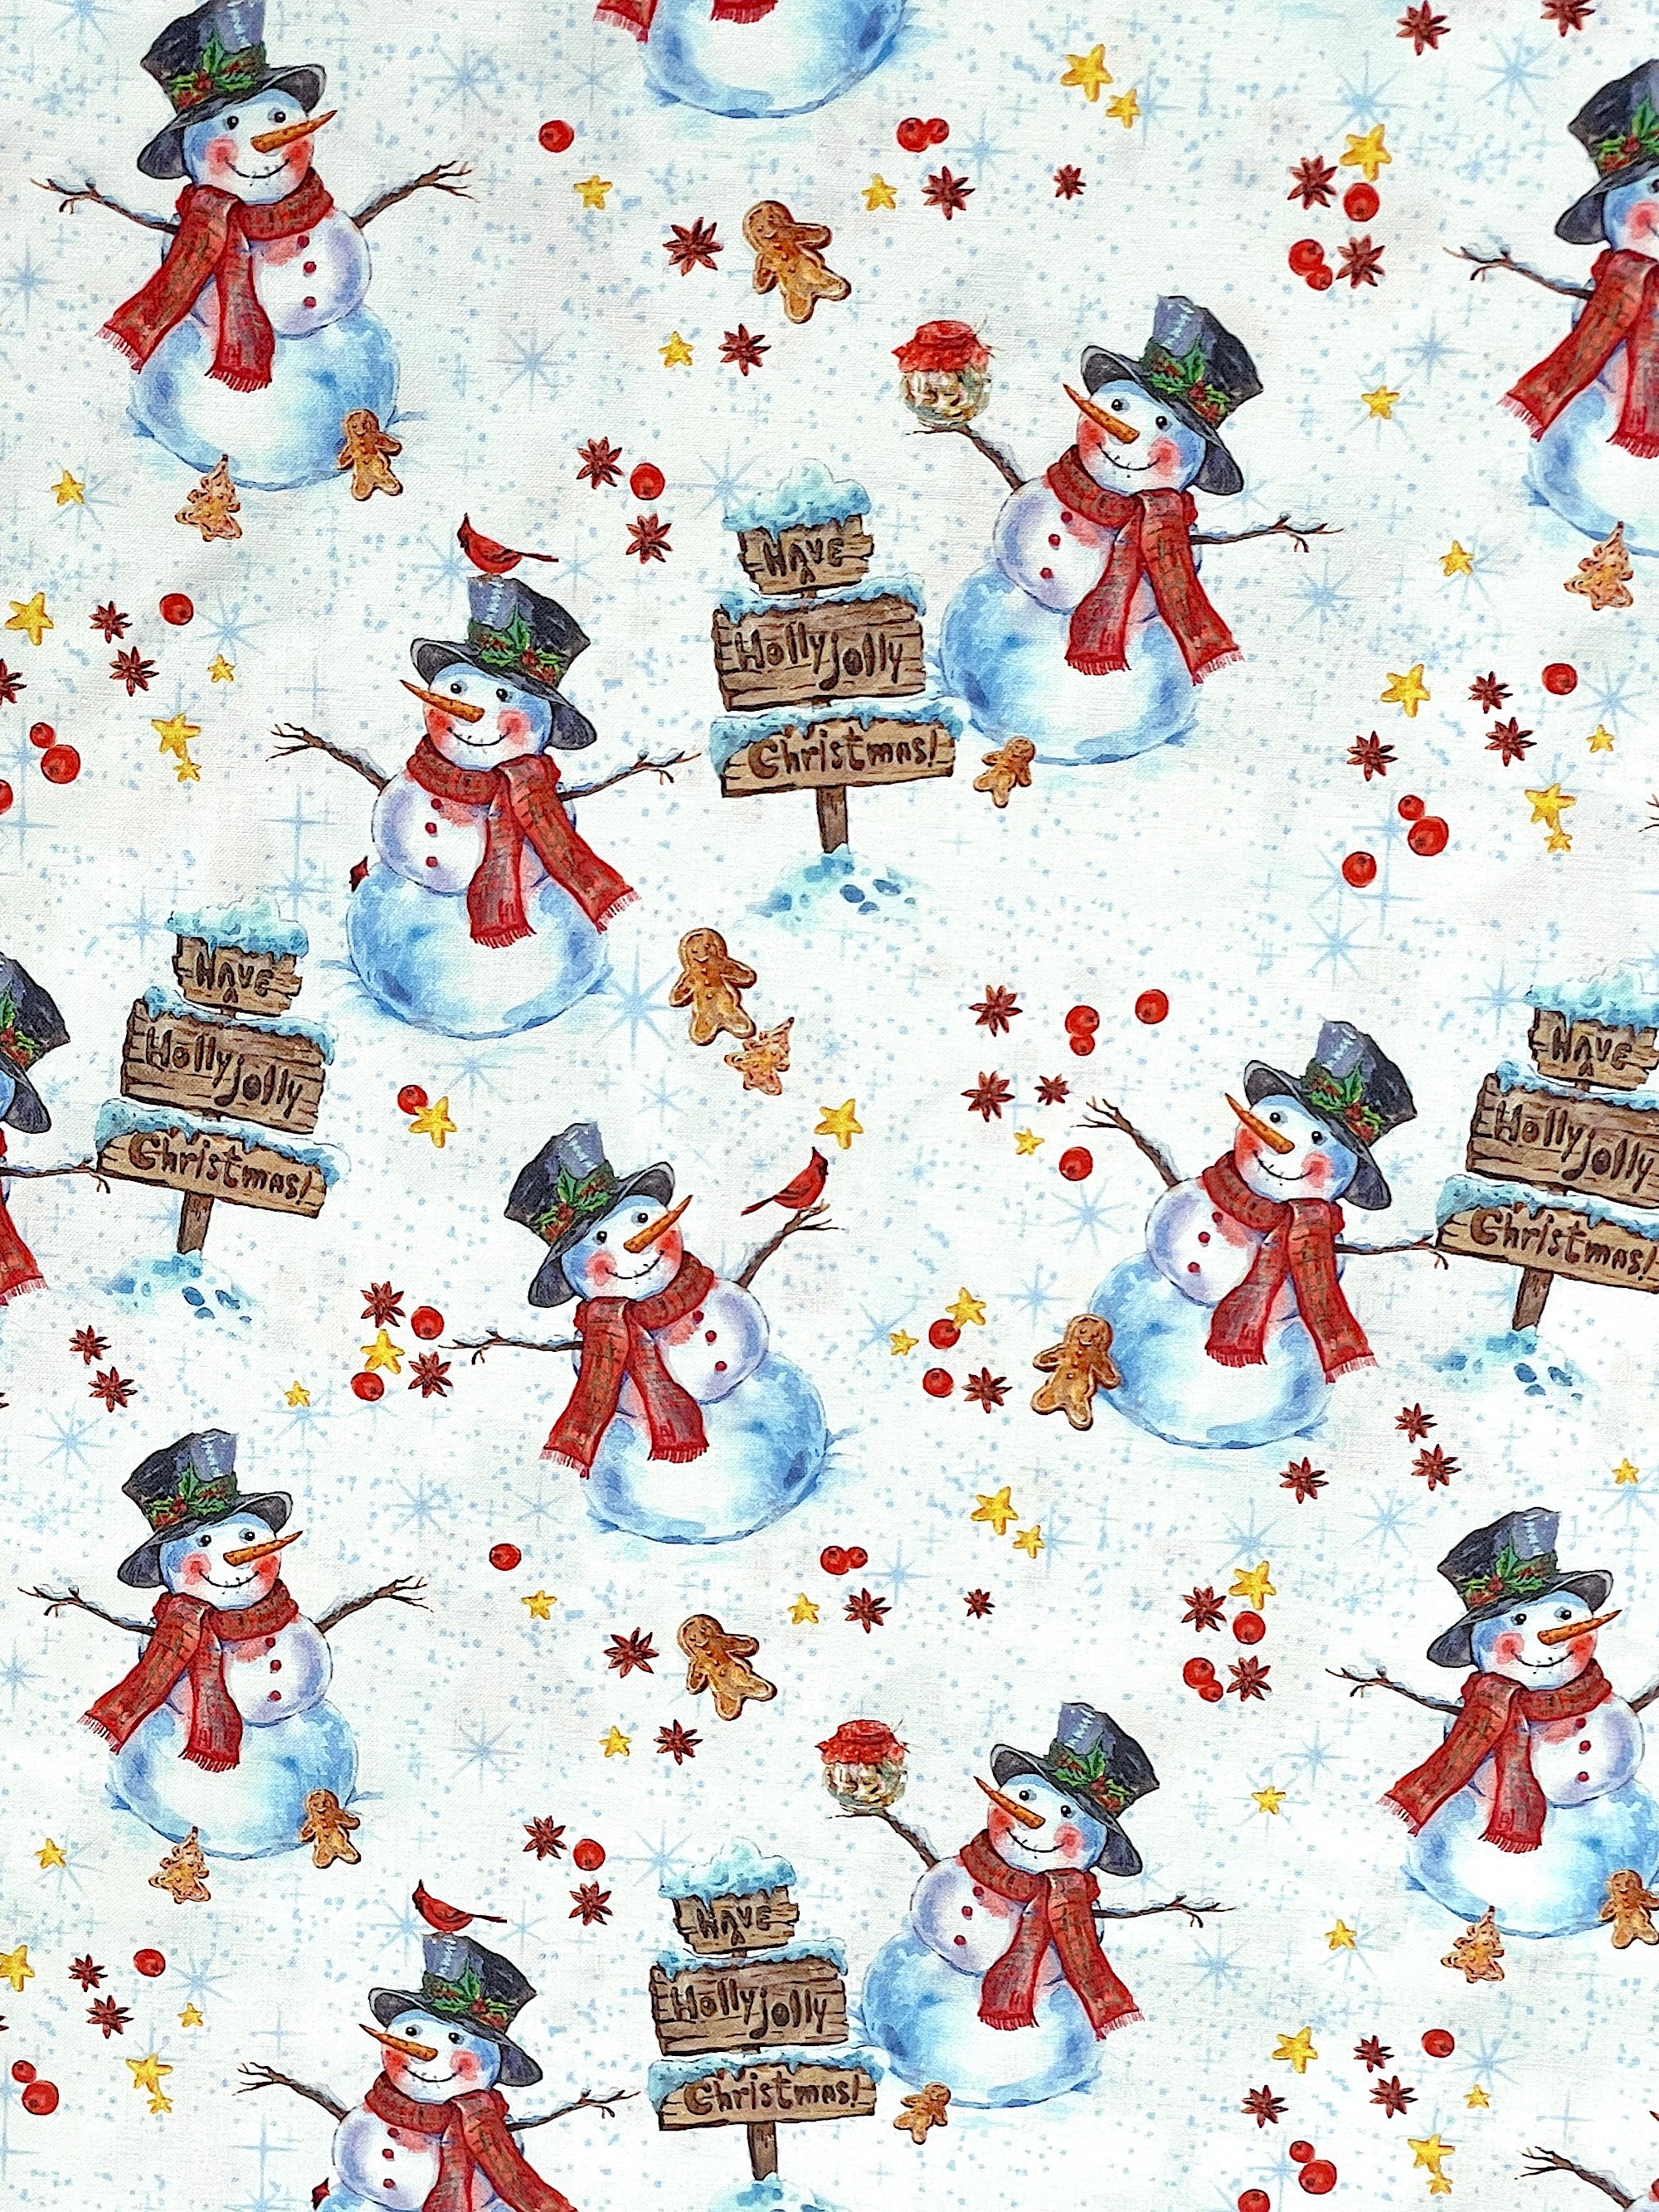 This fabric is part of the Frosty Delights collection by Paintbrush Studio.&nbsp; This white fabric is covered with snowmen, gingerbread men a a sign that says Have a Holly Jolly Christmas